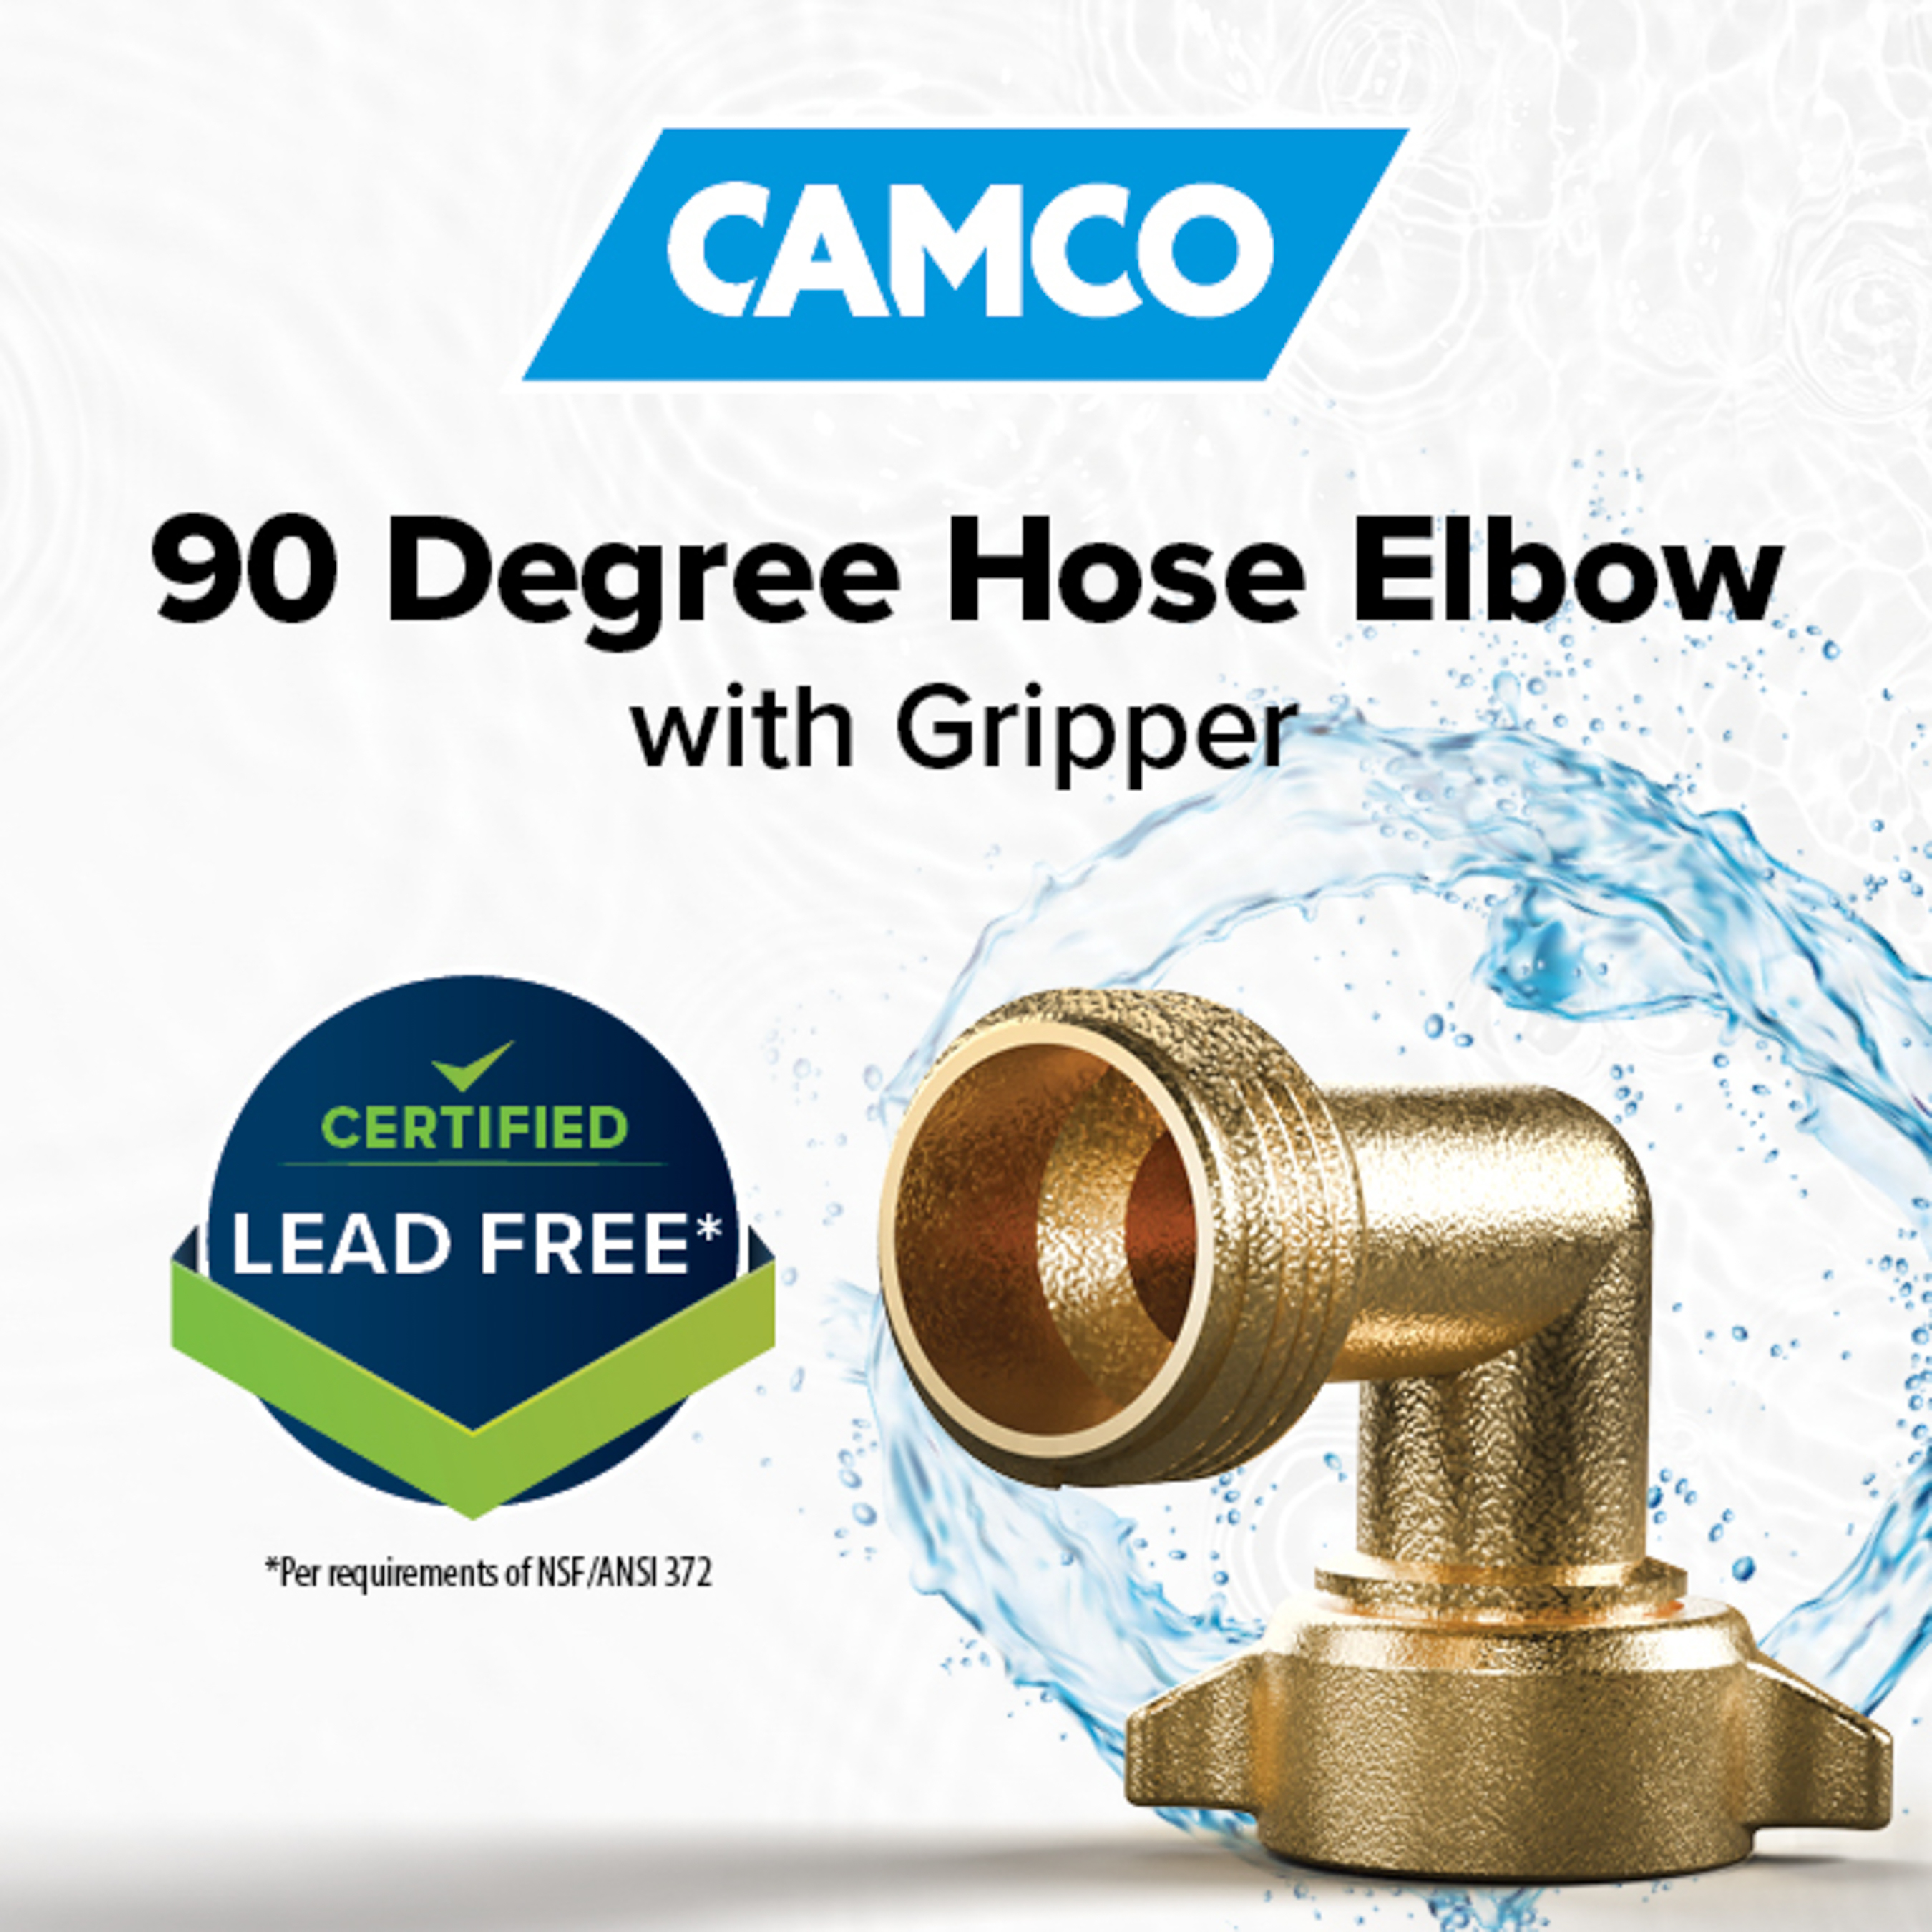 Camco 90-Degree Hose Elbow for RVs - Solid Brass Construction, Certified Lead-Free (22505) - image 2 of 6